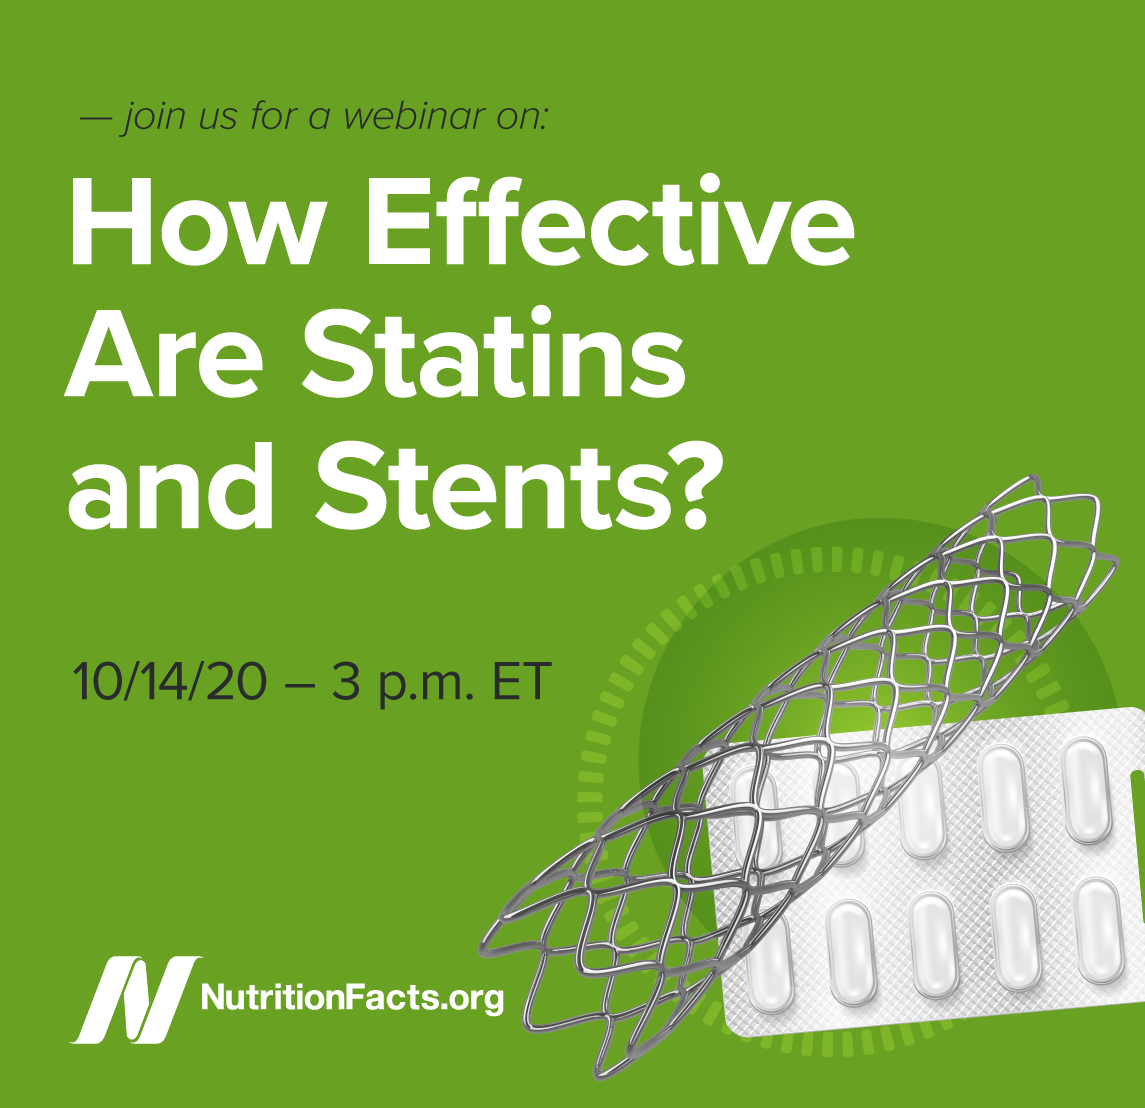 How Effective Are Statins and Stents?